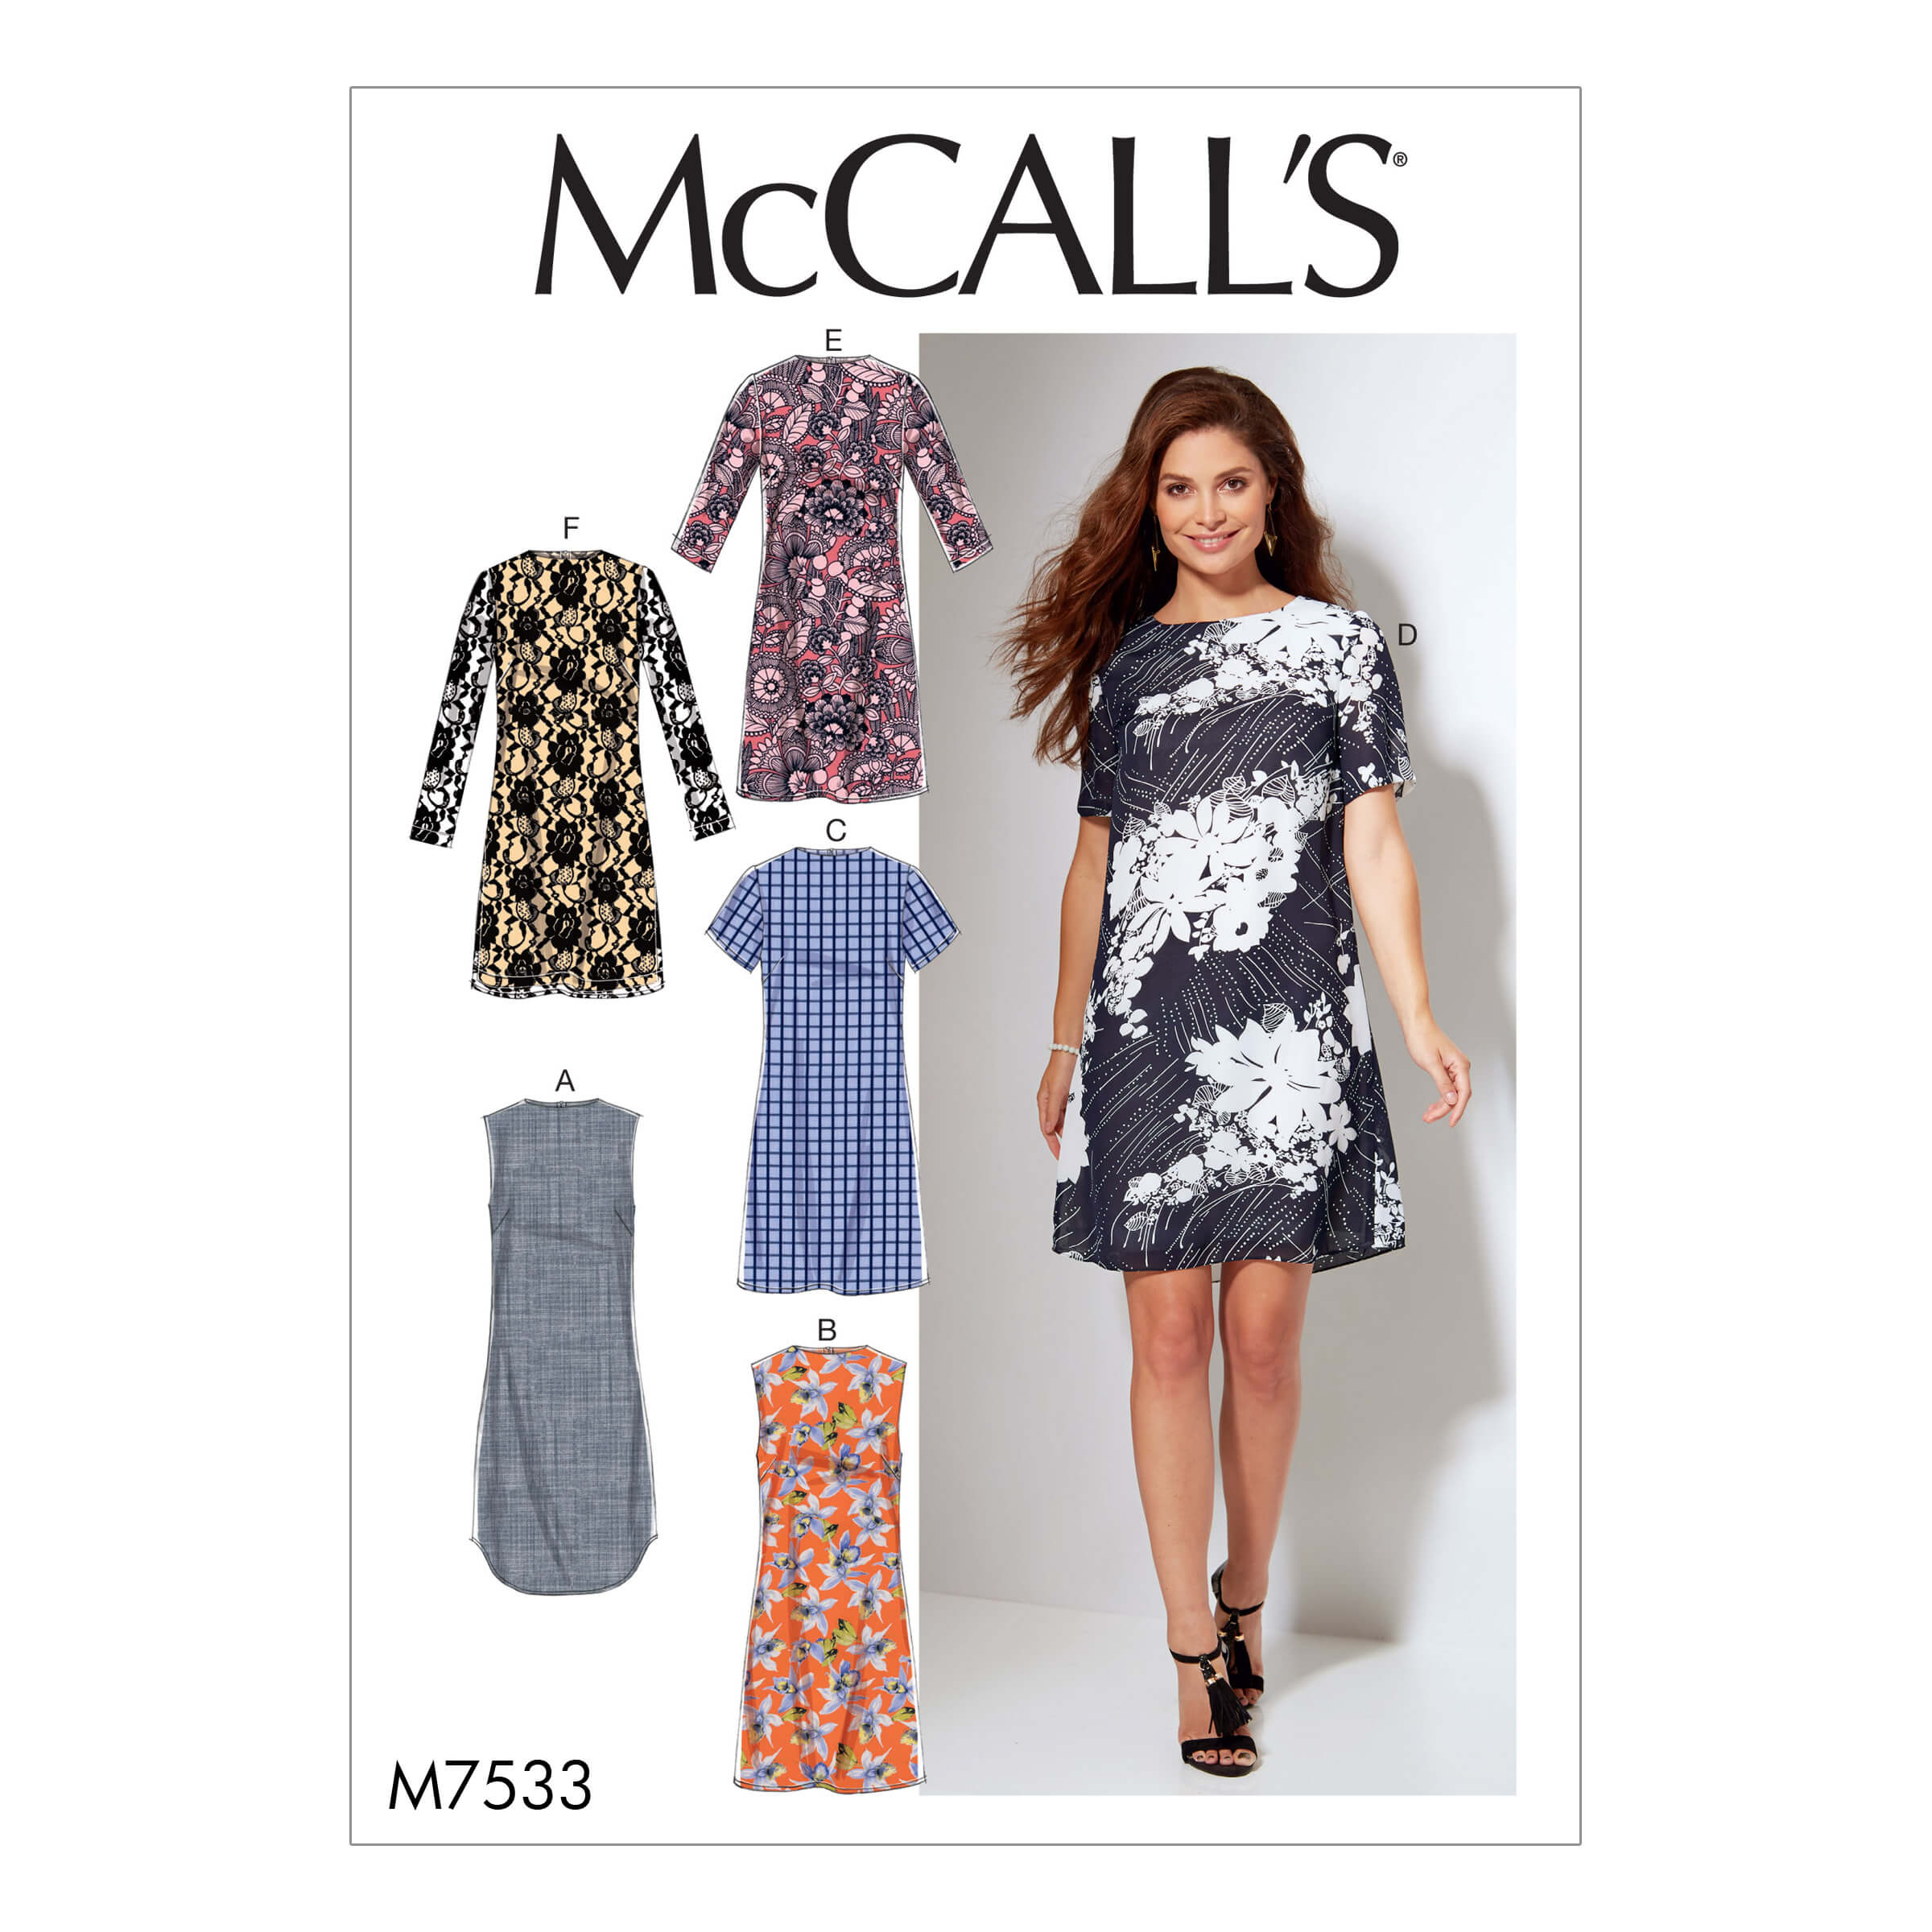 McCall's Sewing Pattern M7533 Misses'/Women's Fitted, Sheath Dresses